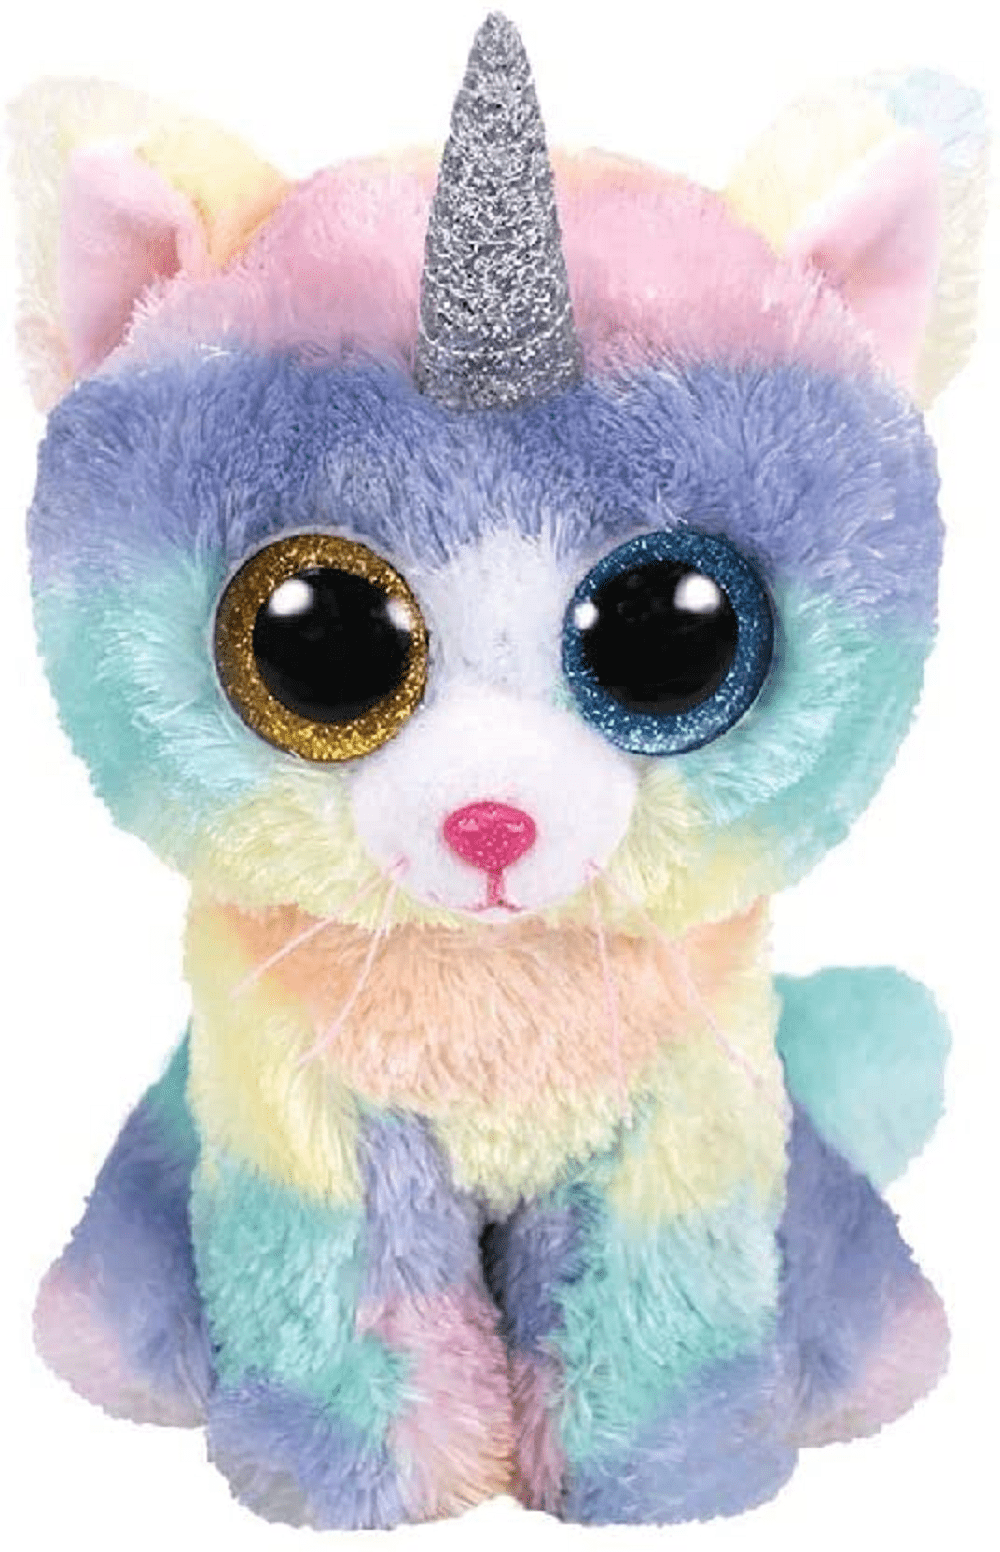 Ty Beanie Babies 36250 Boos Heather The Unicorn Cat Unikitty Boo for sale online 